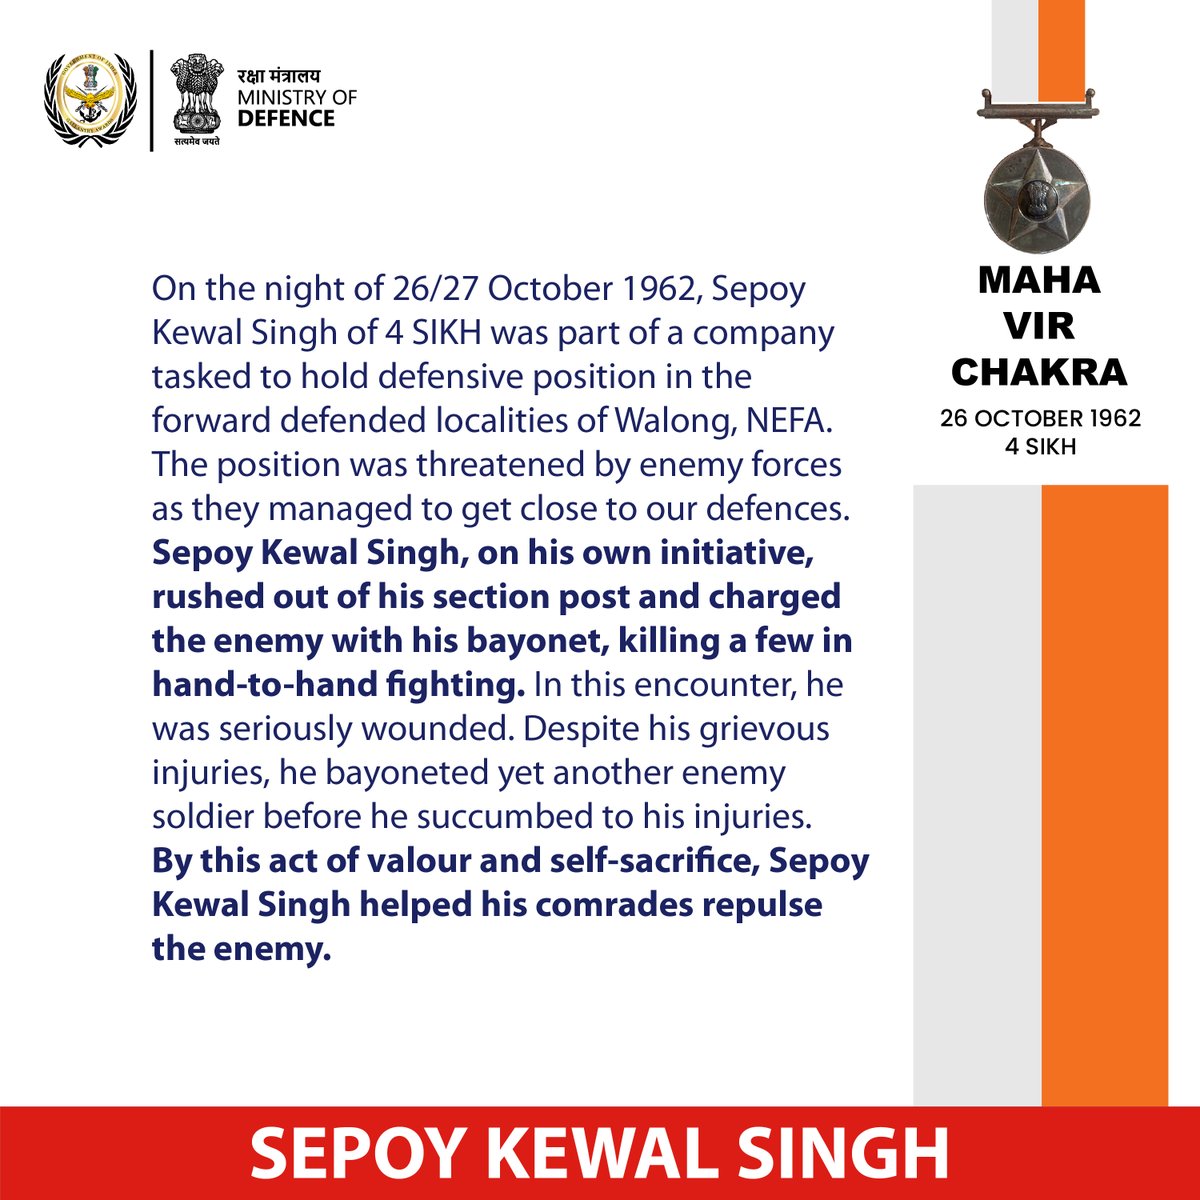 On 26/27 October 1962, Sepoy Kewal Singh of 4 SIKH was part of a company tasked to hold defensive position in the forward defended localities of Walong, NEFA. For displaying acts of valour he was awarded #MahaVirChakra posthumously.